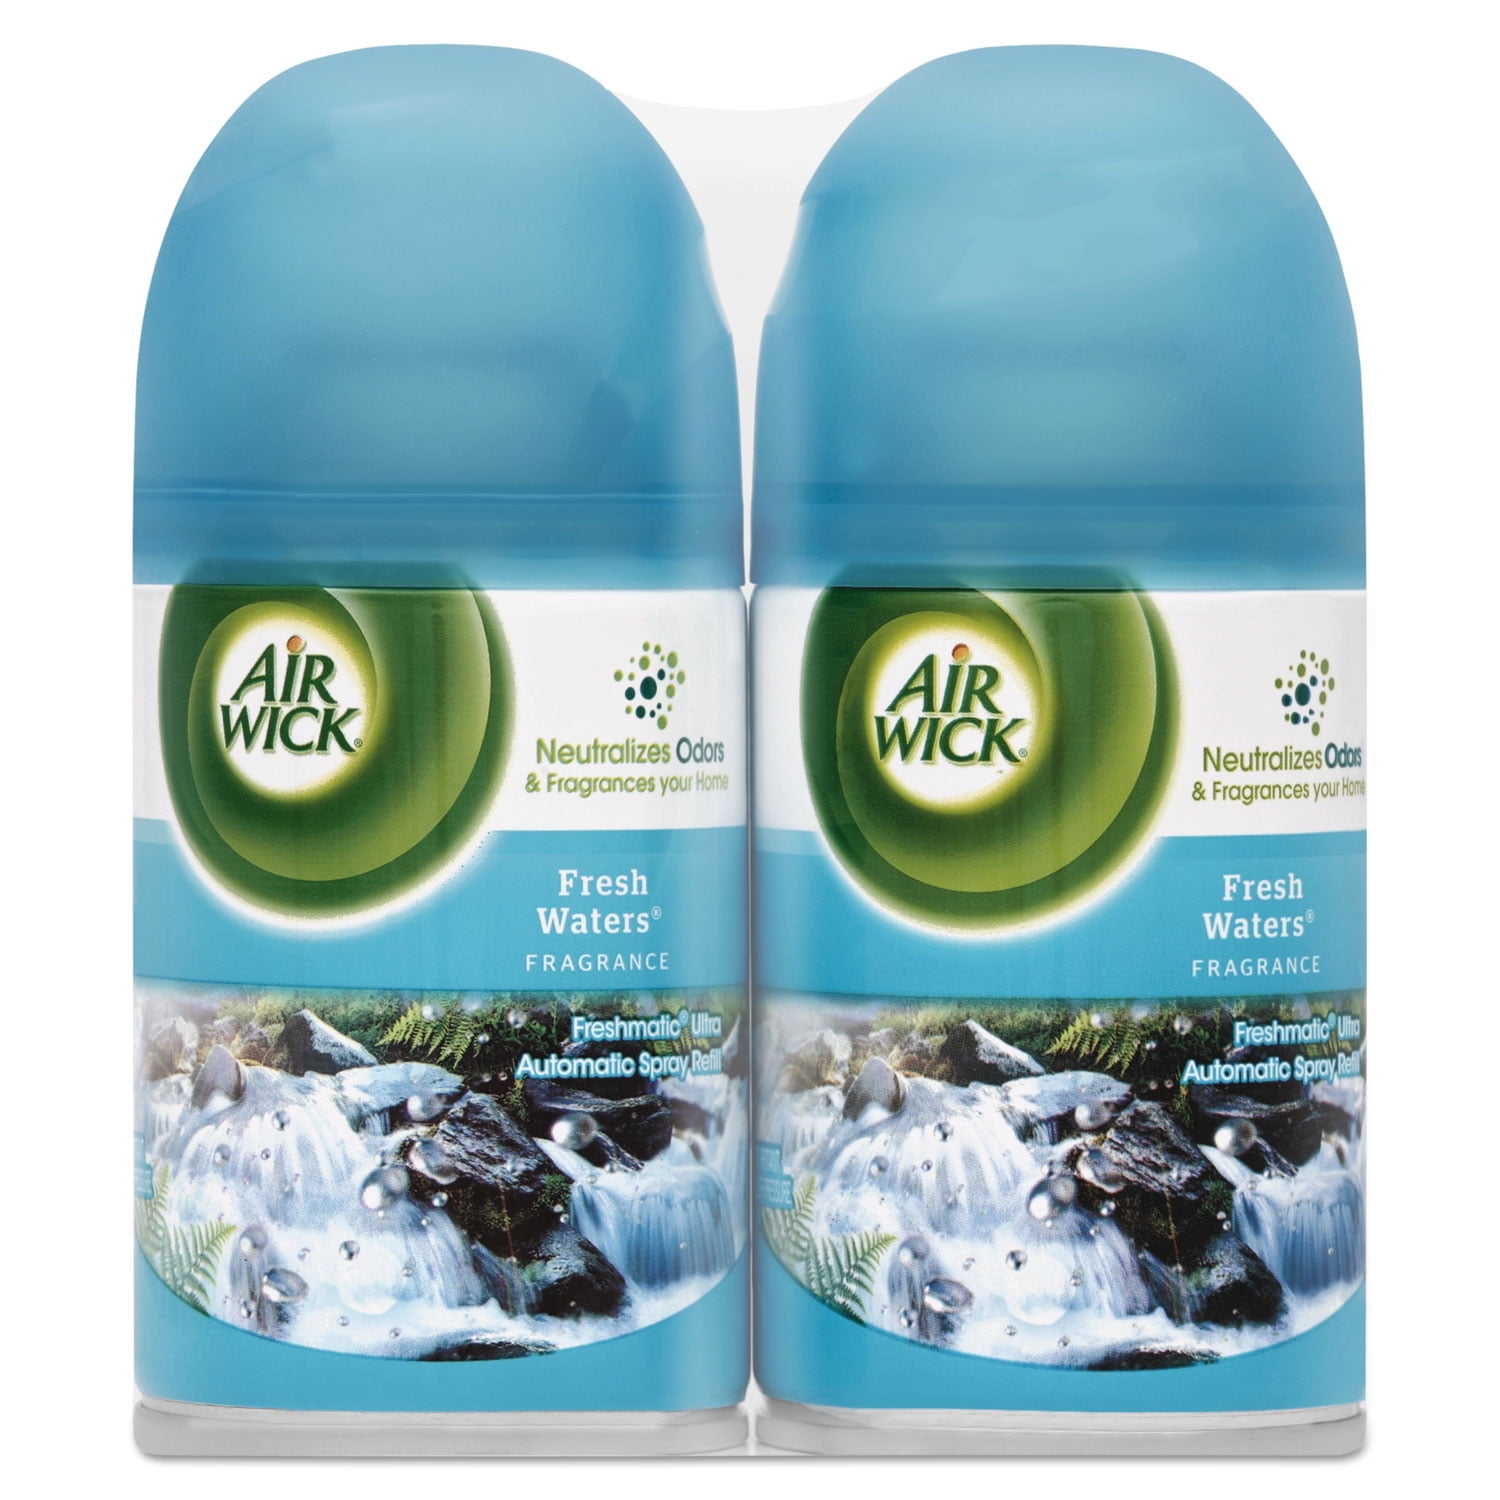 Air Wick Fresh new Day Eliminates odors Air freshener Fresh Waters  Propelled by 100 % Filtered air 8oz each 2 Pack